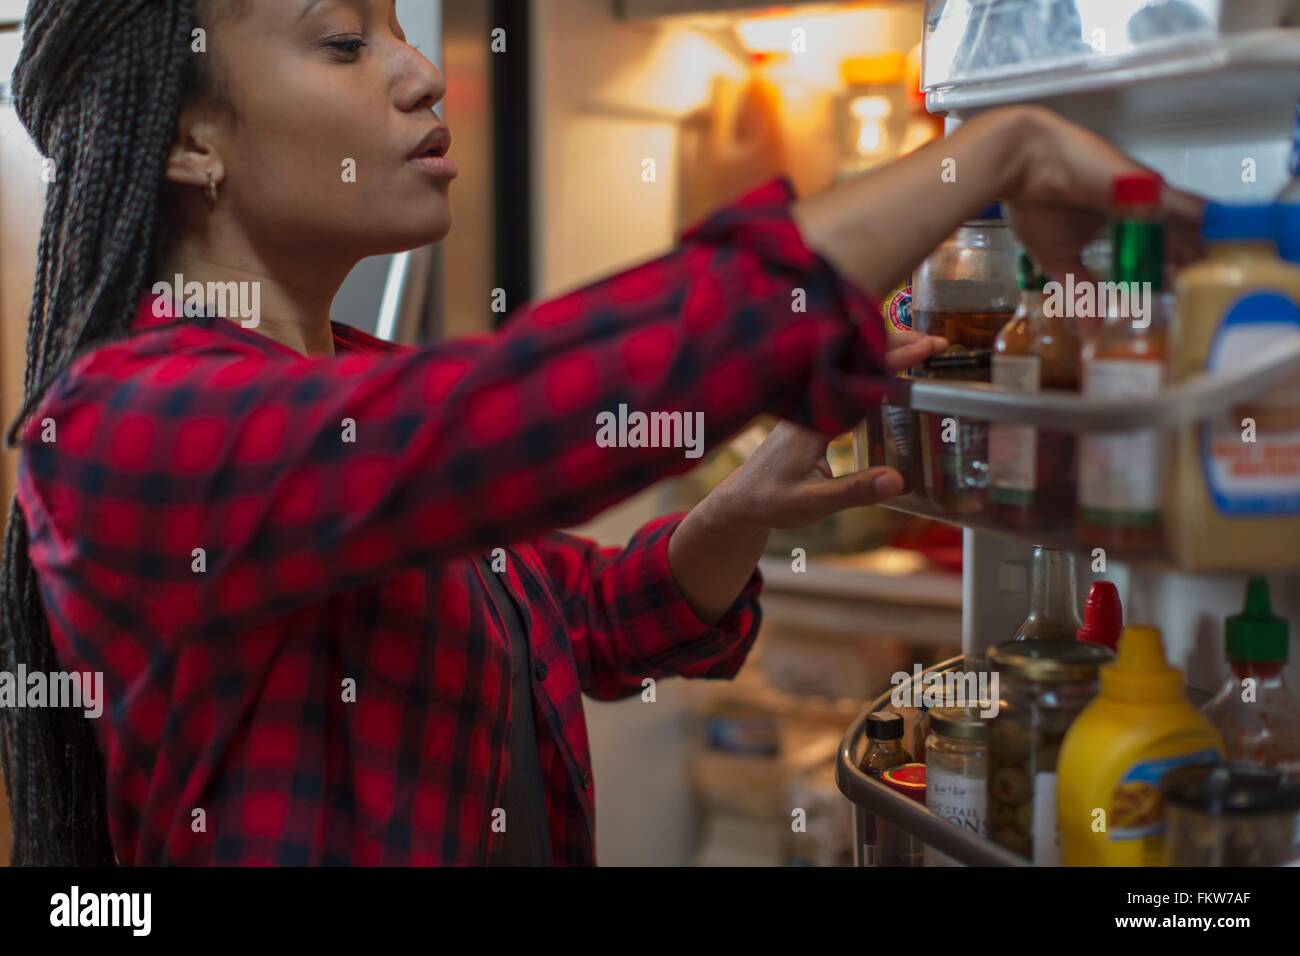 Mid adult woman choosing food from refrigerator in kitchen Stock Photo